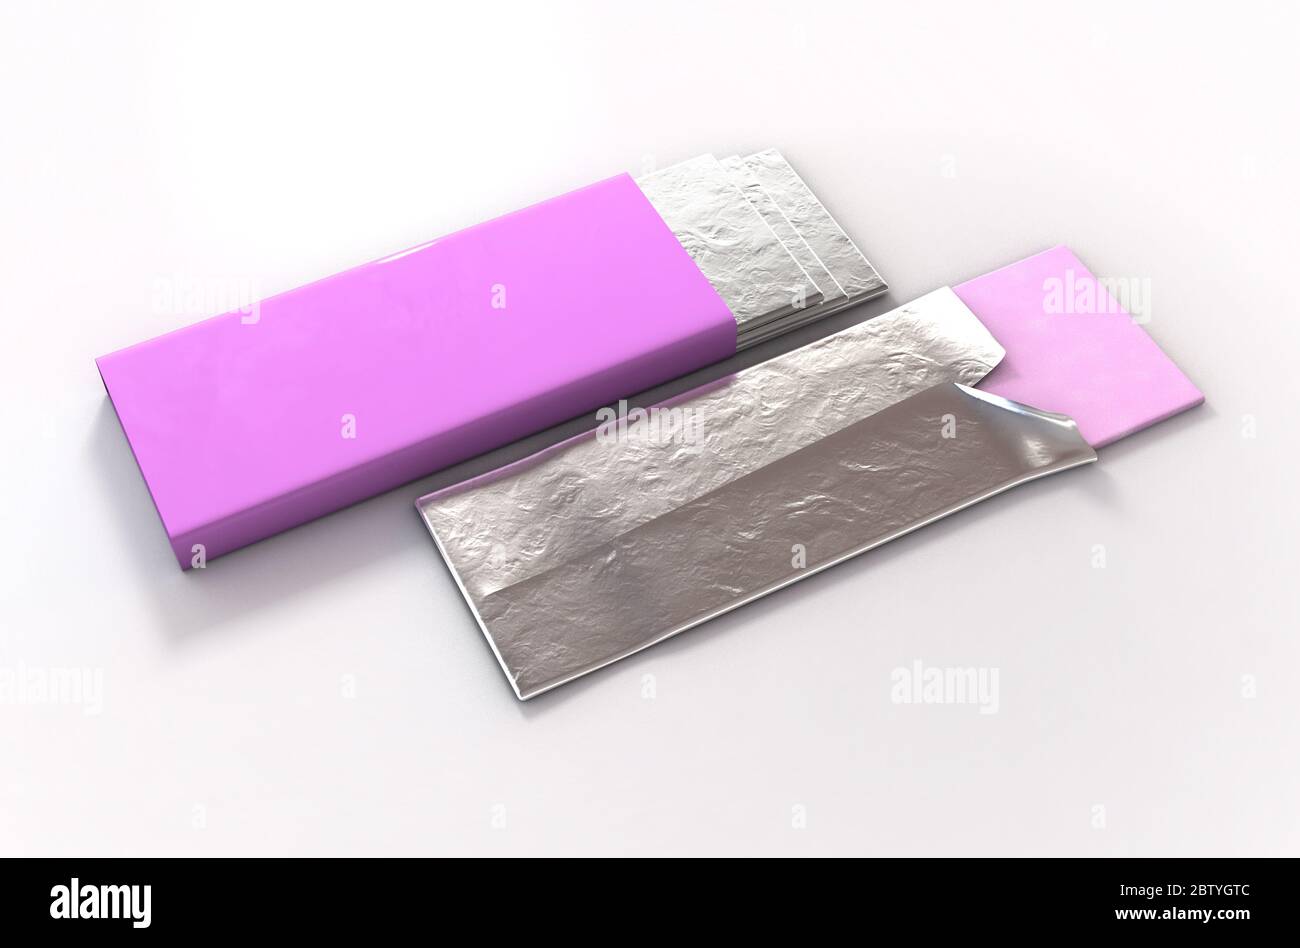 A non branded bubble gum packaging with a pink wrapper and four foiled sticks of gum protruding out - 3D render Stock Photo